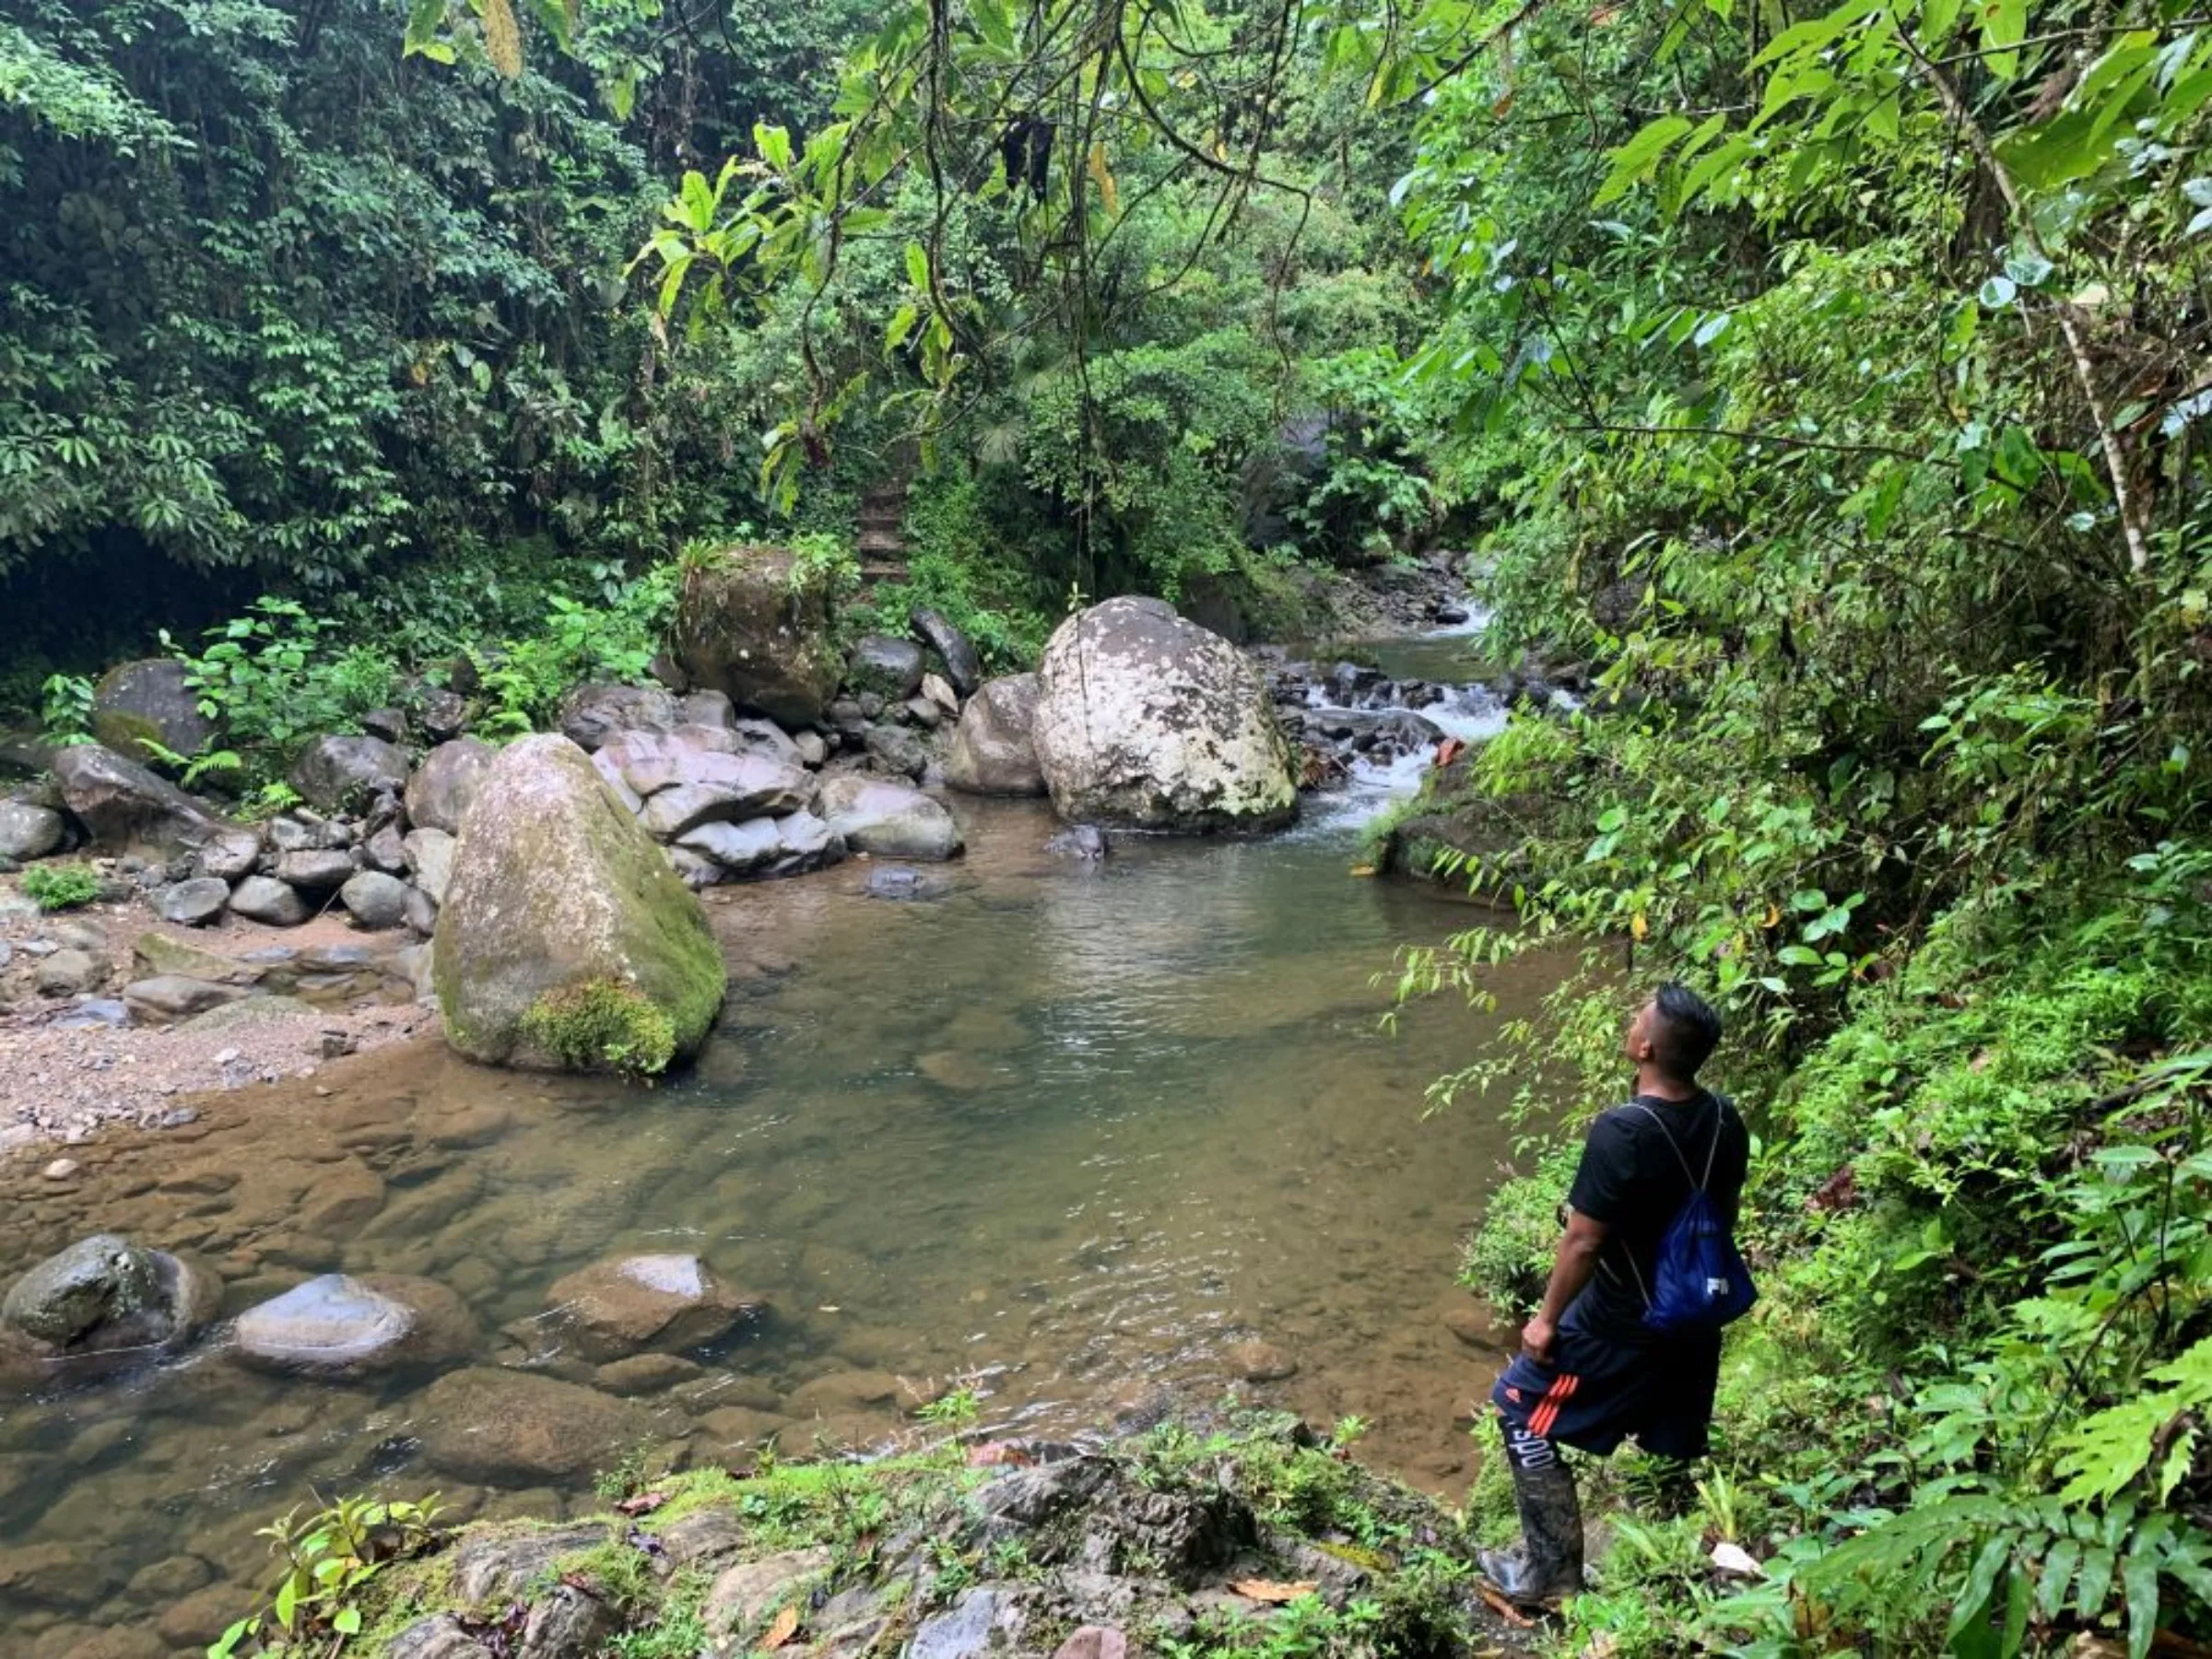 Indigenous guide Osvaldo Martinez prepares to cross a stream in the Nairi-Awari territory, Costa Rica, November 6, 2022. The territory straddles on the 174-mile Camino de Costa Rica footpath, that starts in Barra de Pacuare and finishes in Quepos, on the Pacific